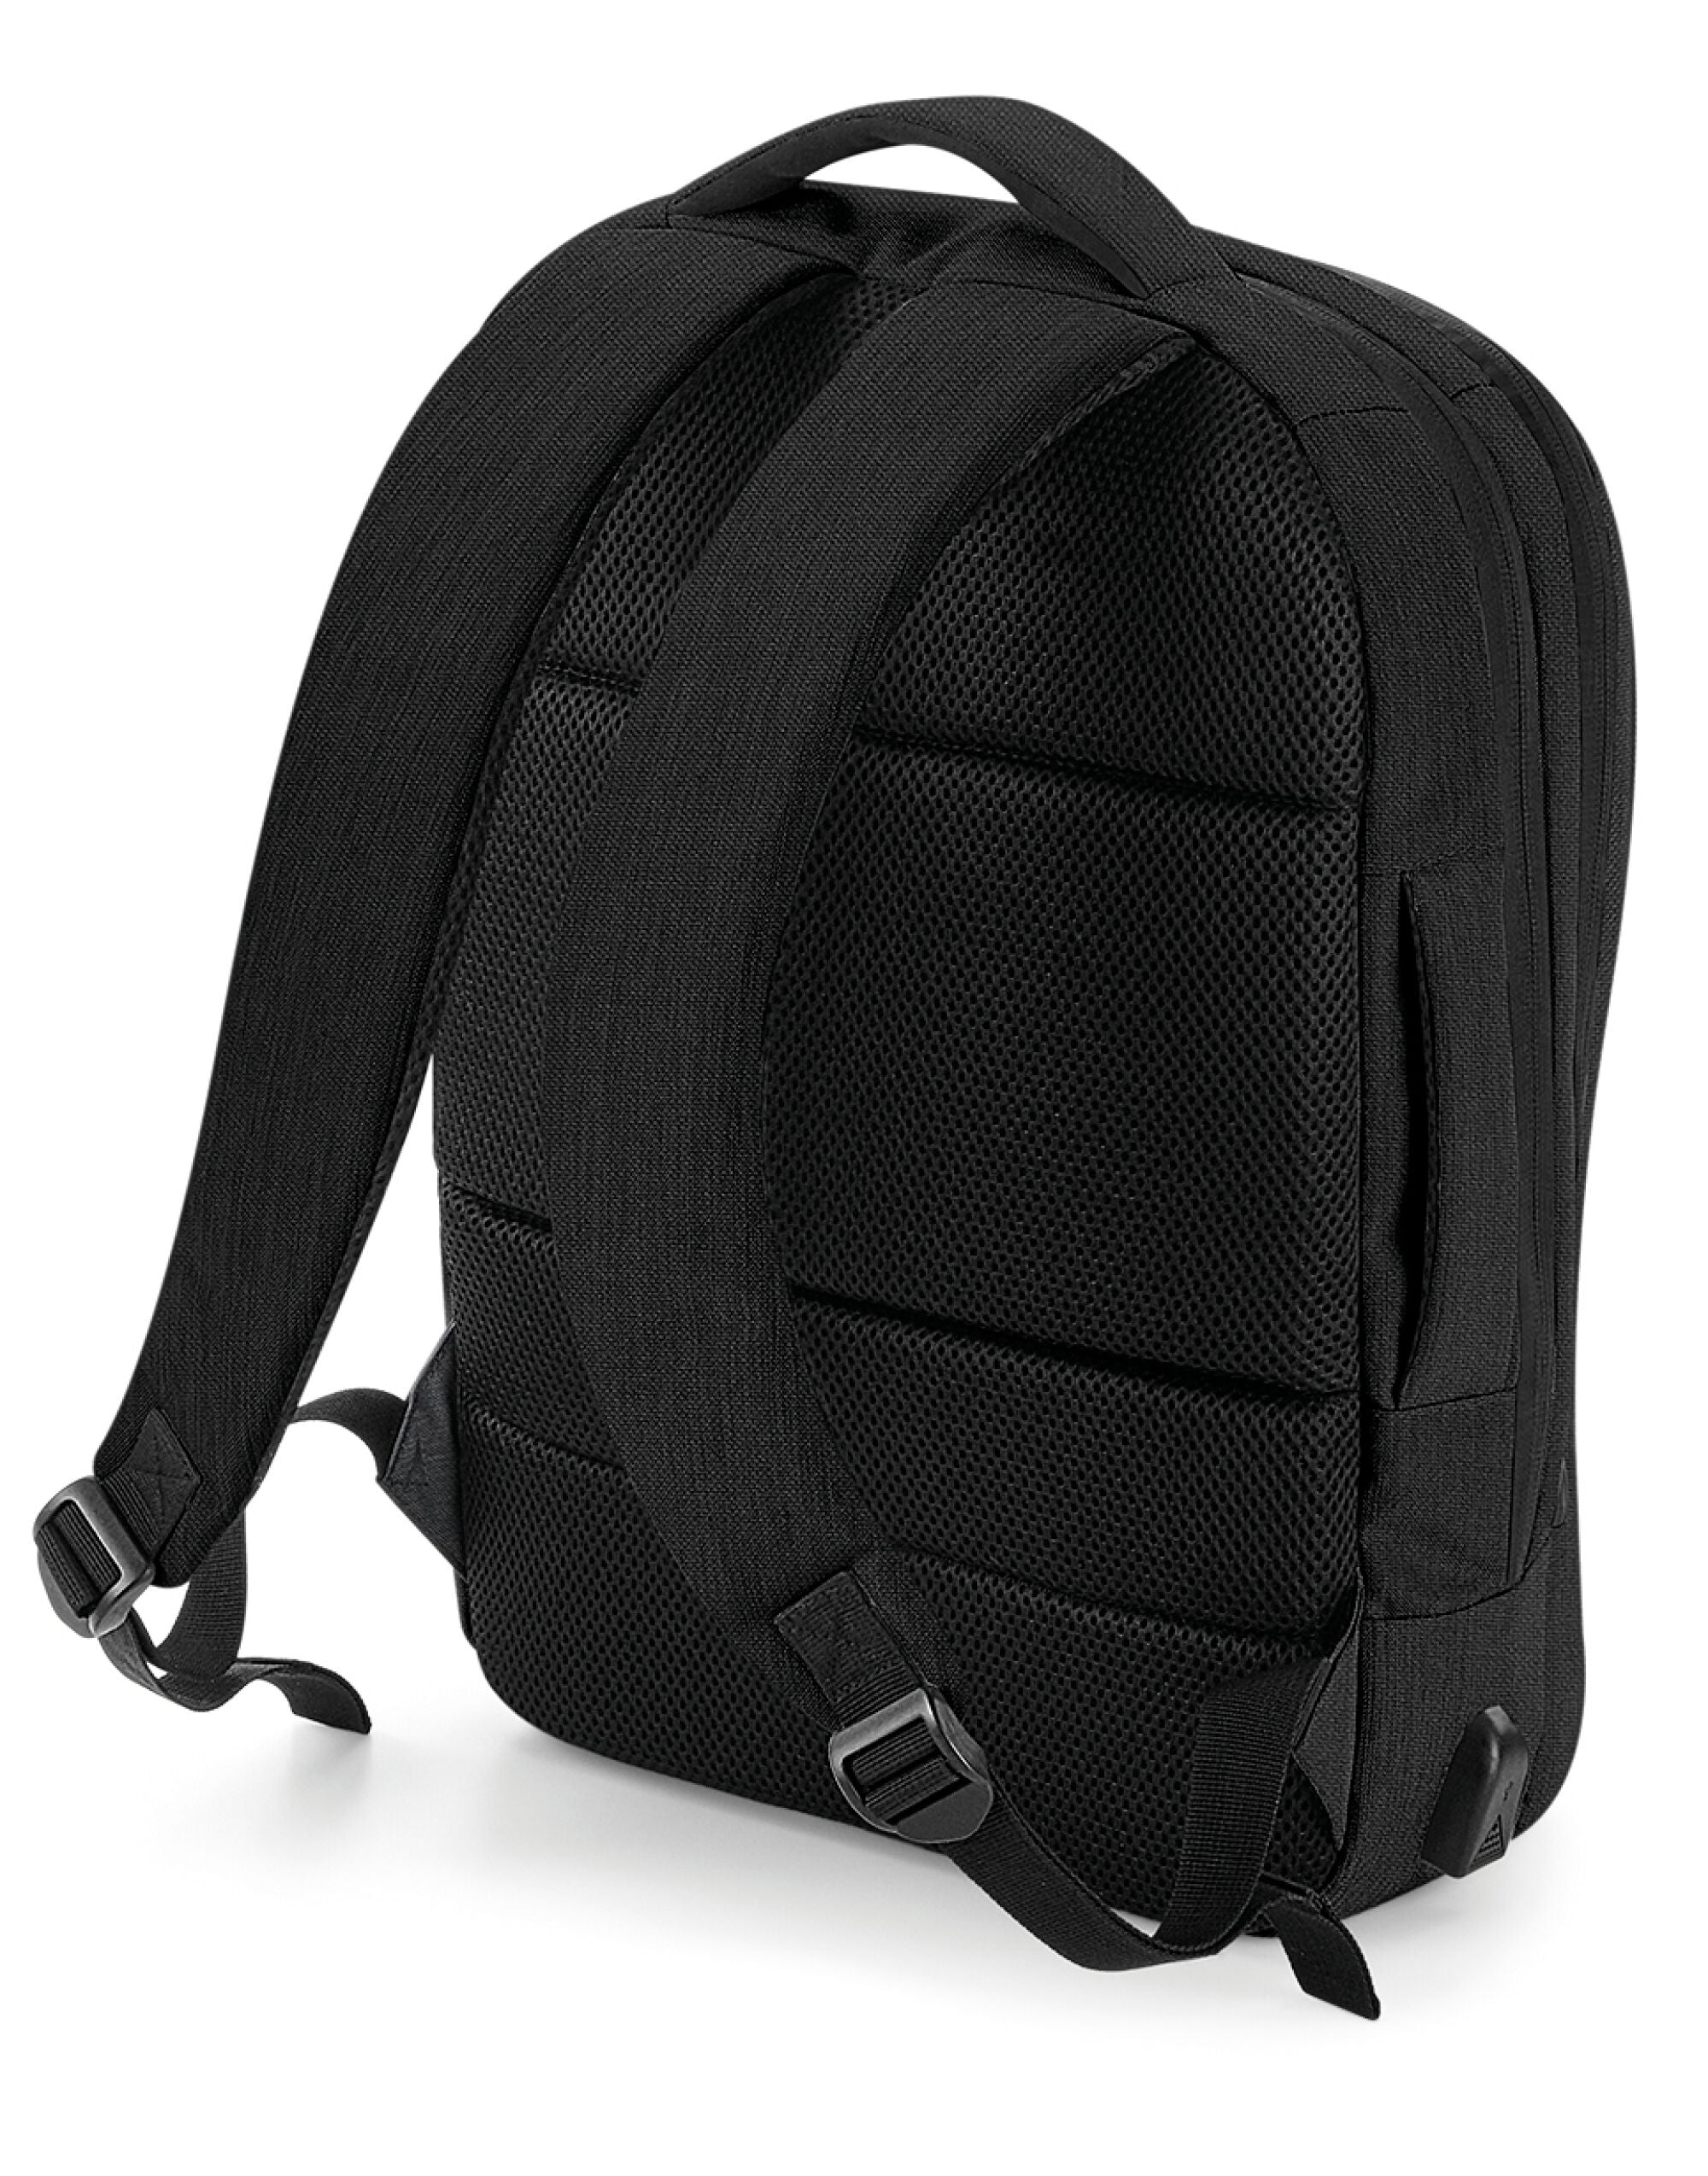 Quadra Q-Tech Charge Convertible Backpack TearAway label for ease of rebranding (QD990)